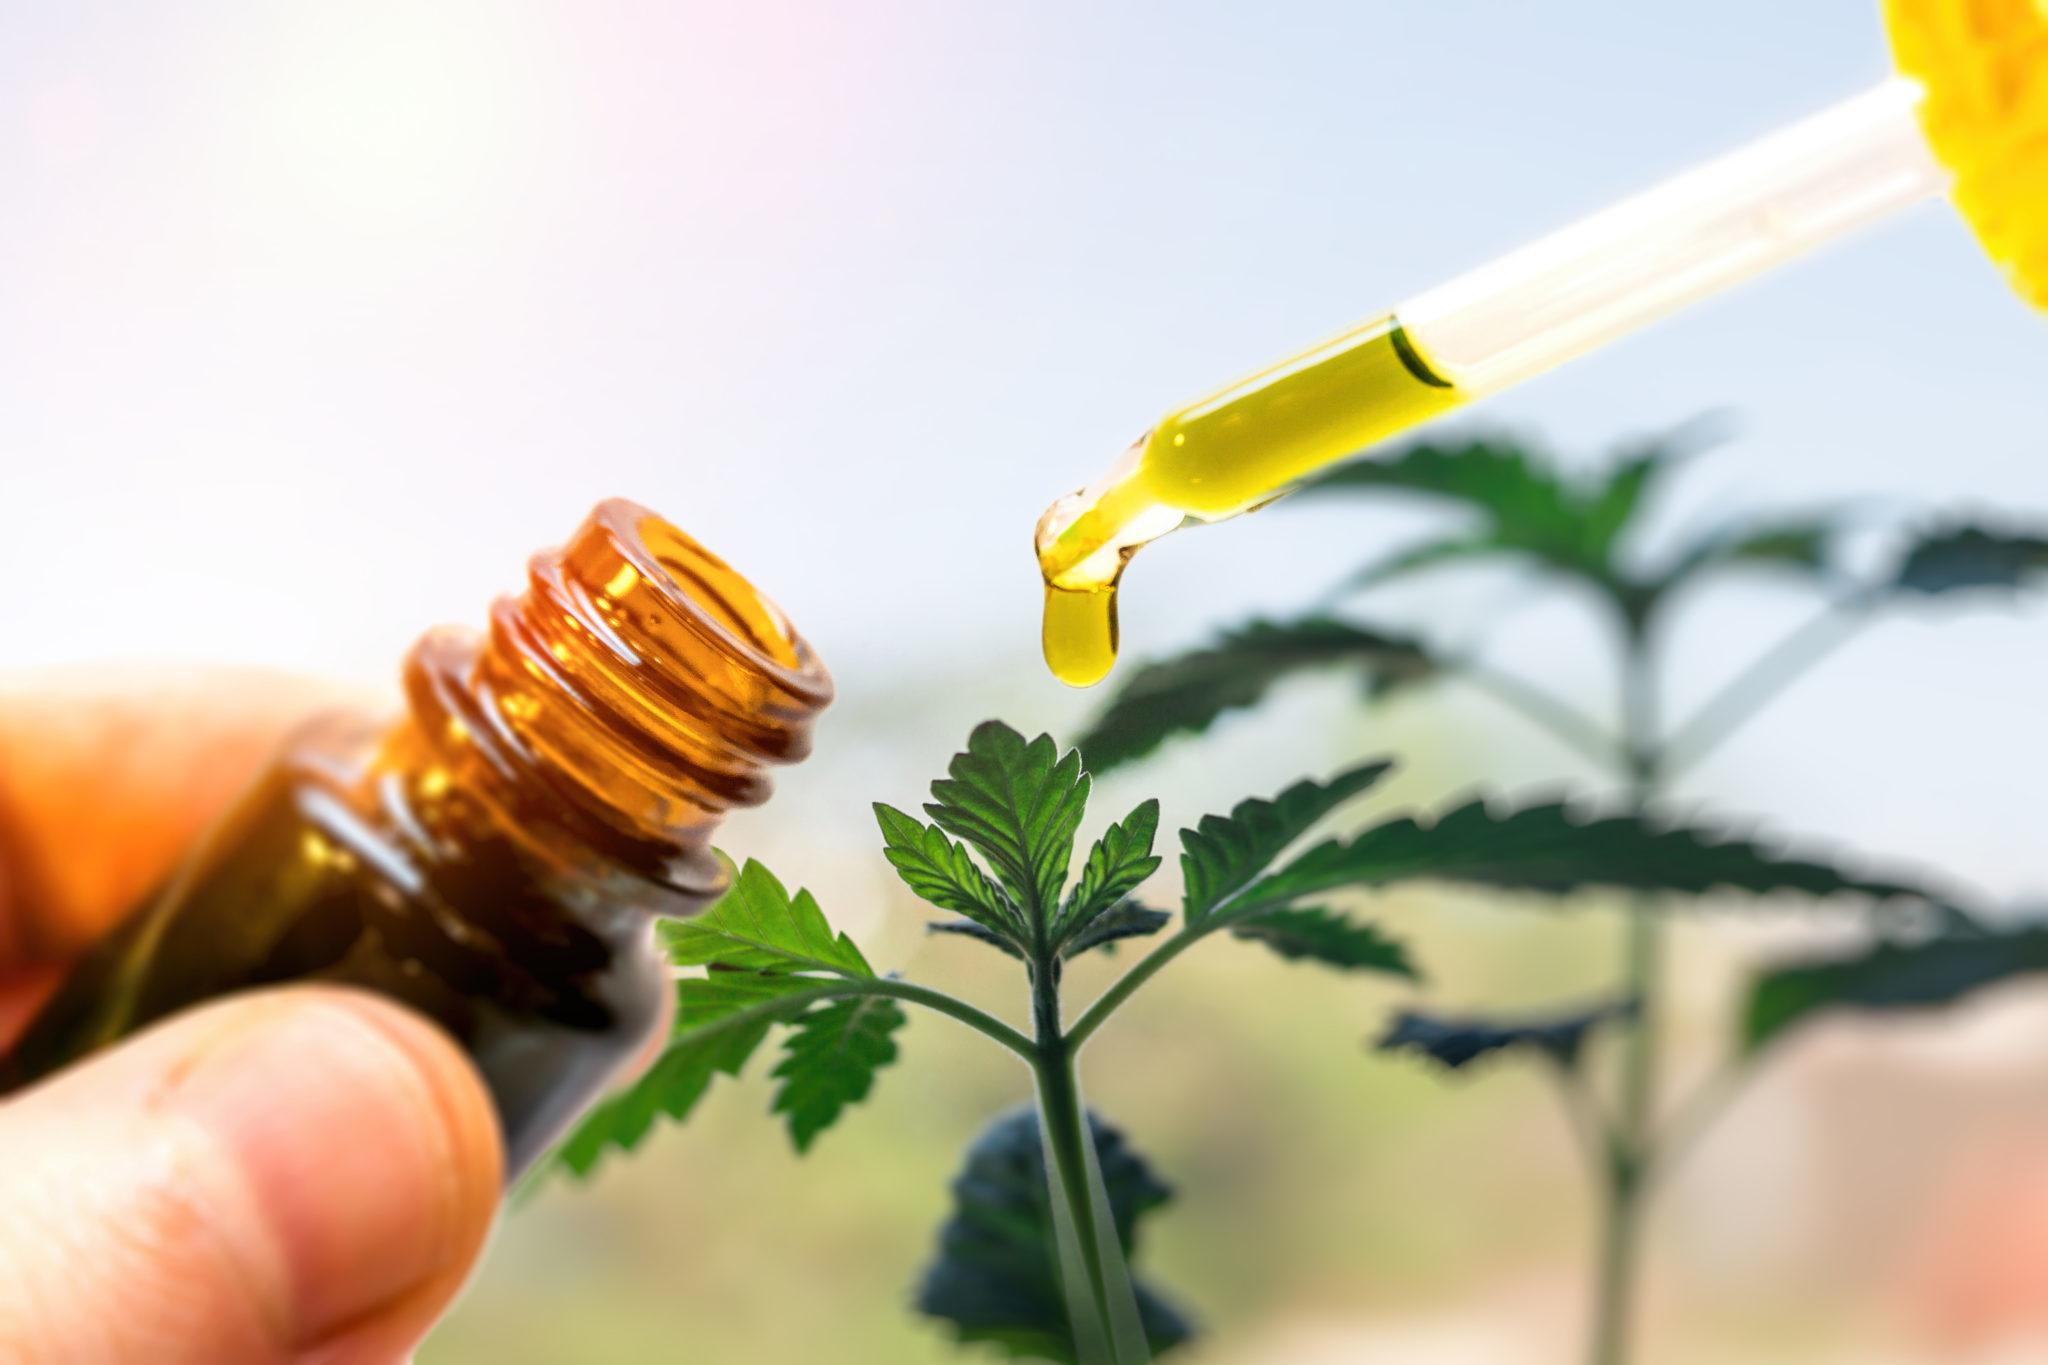 While numerous factors make CBD expensive, there are a number of special discounts and CBD assistance programs available to people with low incomes, the disabled, and military veterans among others. Photo: Hands holding a brown glass bottle of CBD oil, and a dropper with a drop of CBD dripping out, against a background of green hemp plants.